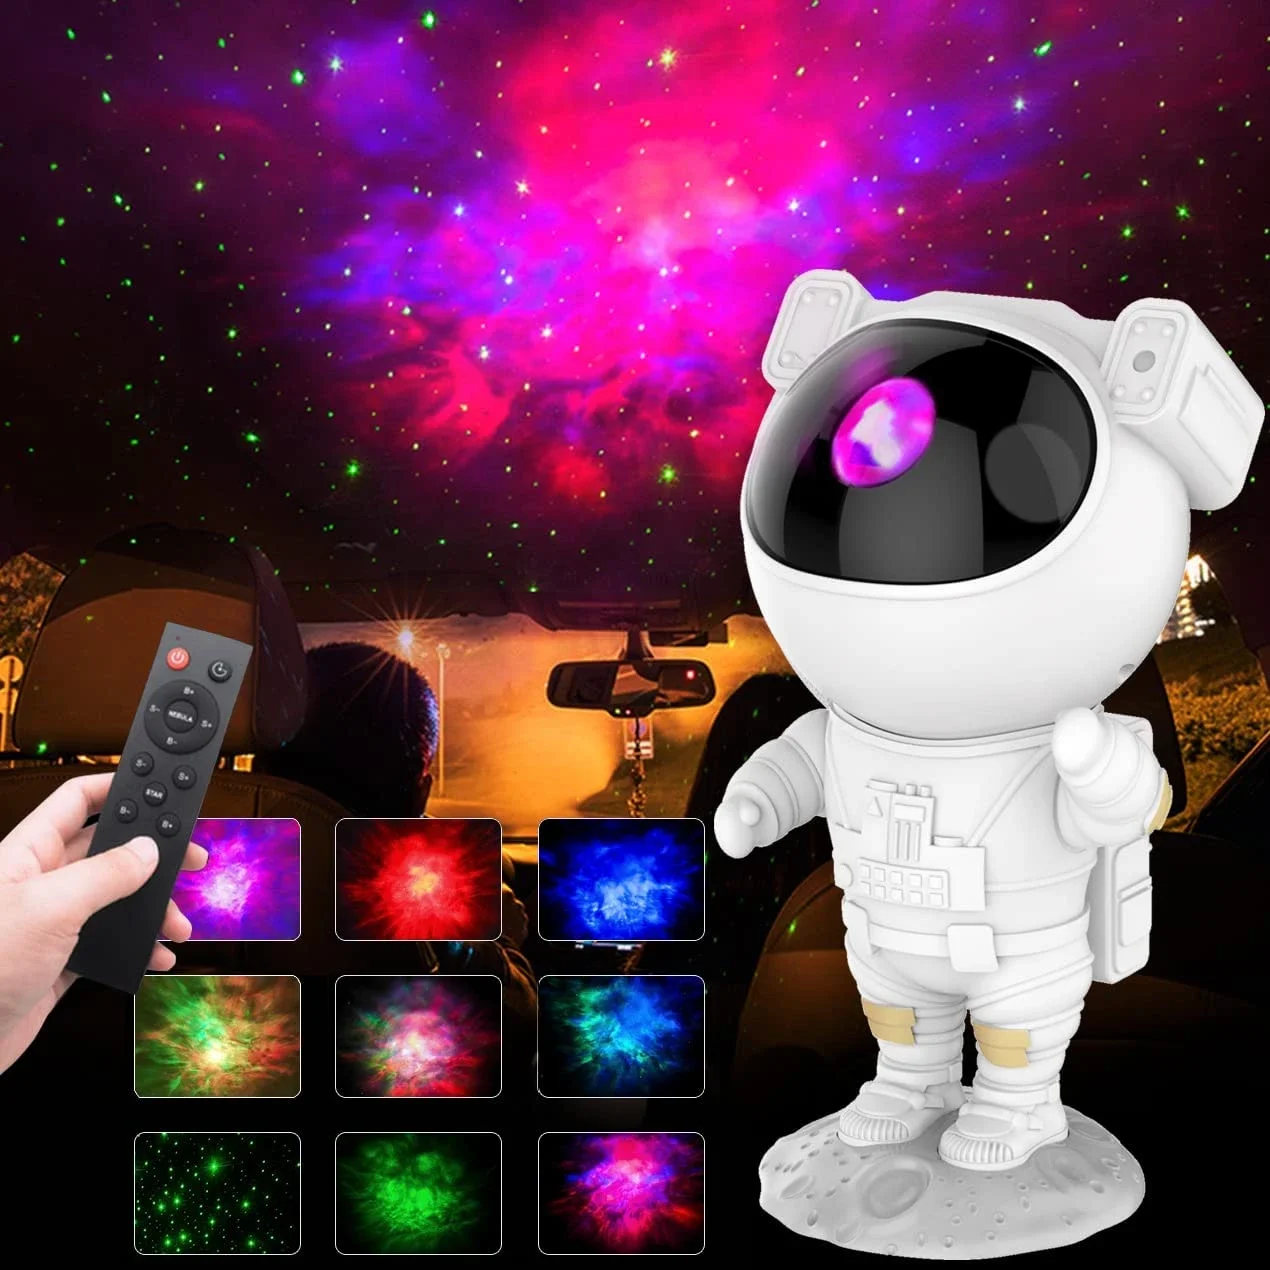 

NEW Kids Star Projector Night Light with Remote Control 360°Adjustable Design Astronaut Nebula Galaxy Lighting for Children